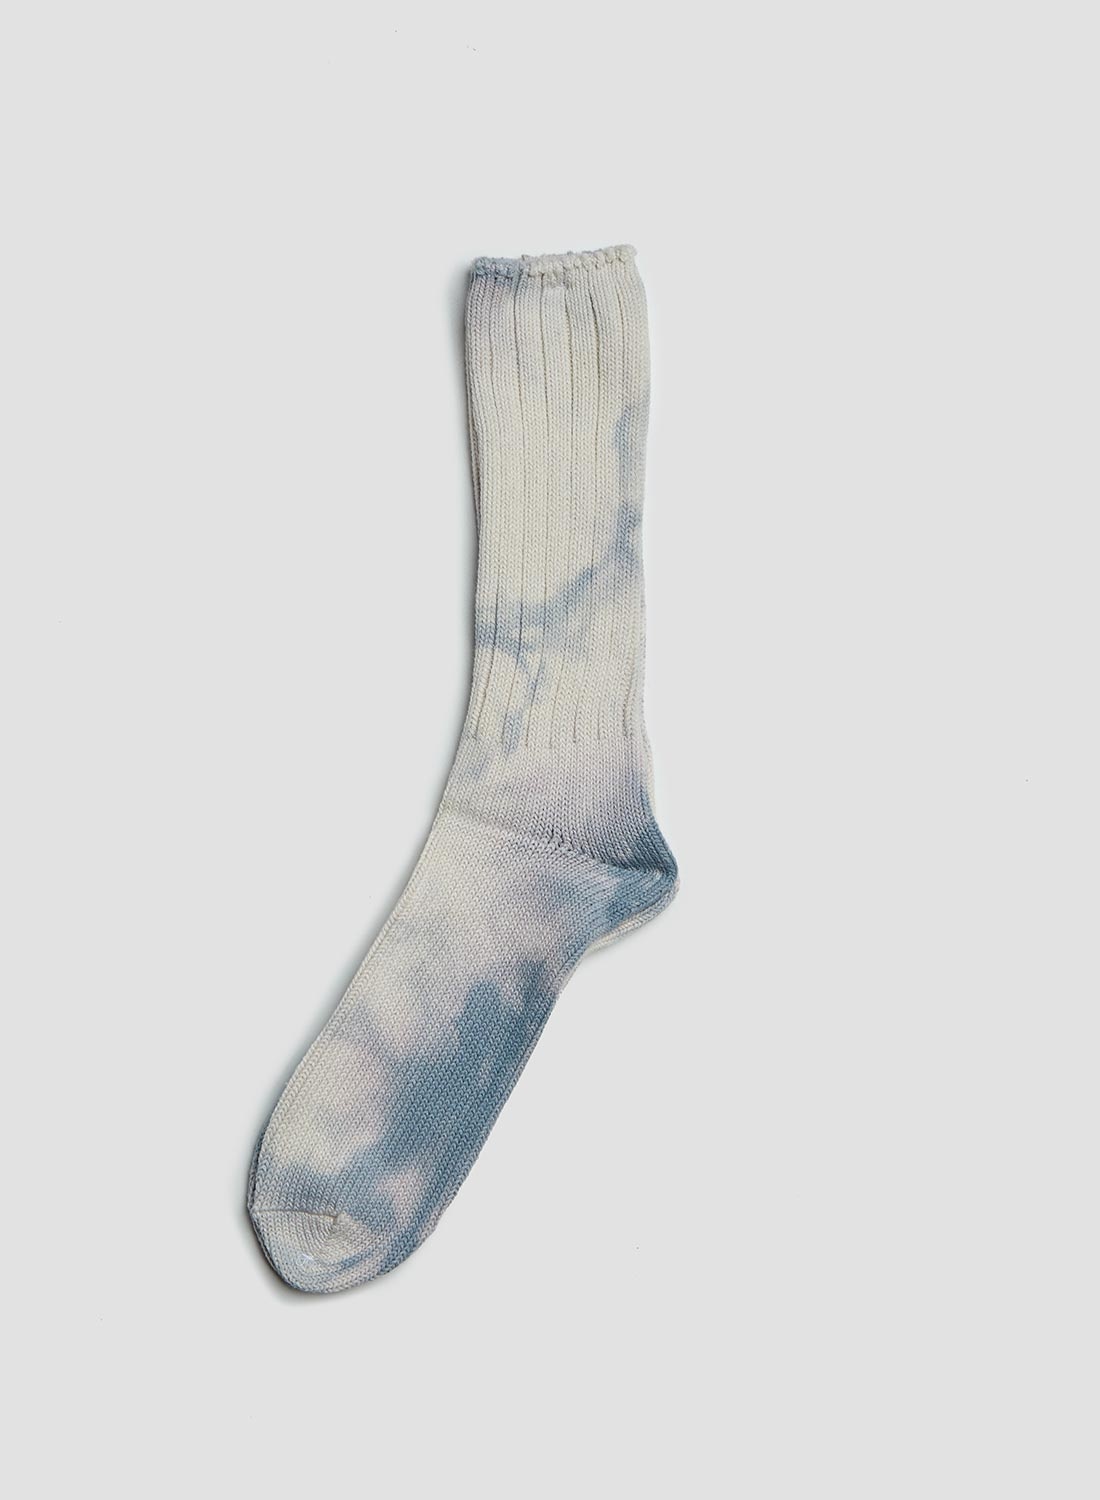 Anonymous Ism Uneven Dye Crew Sock in Blue - 2